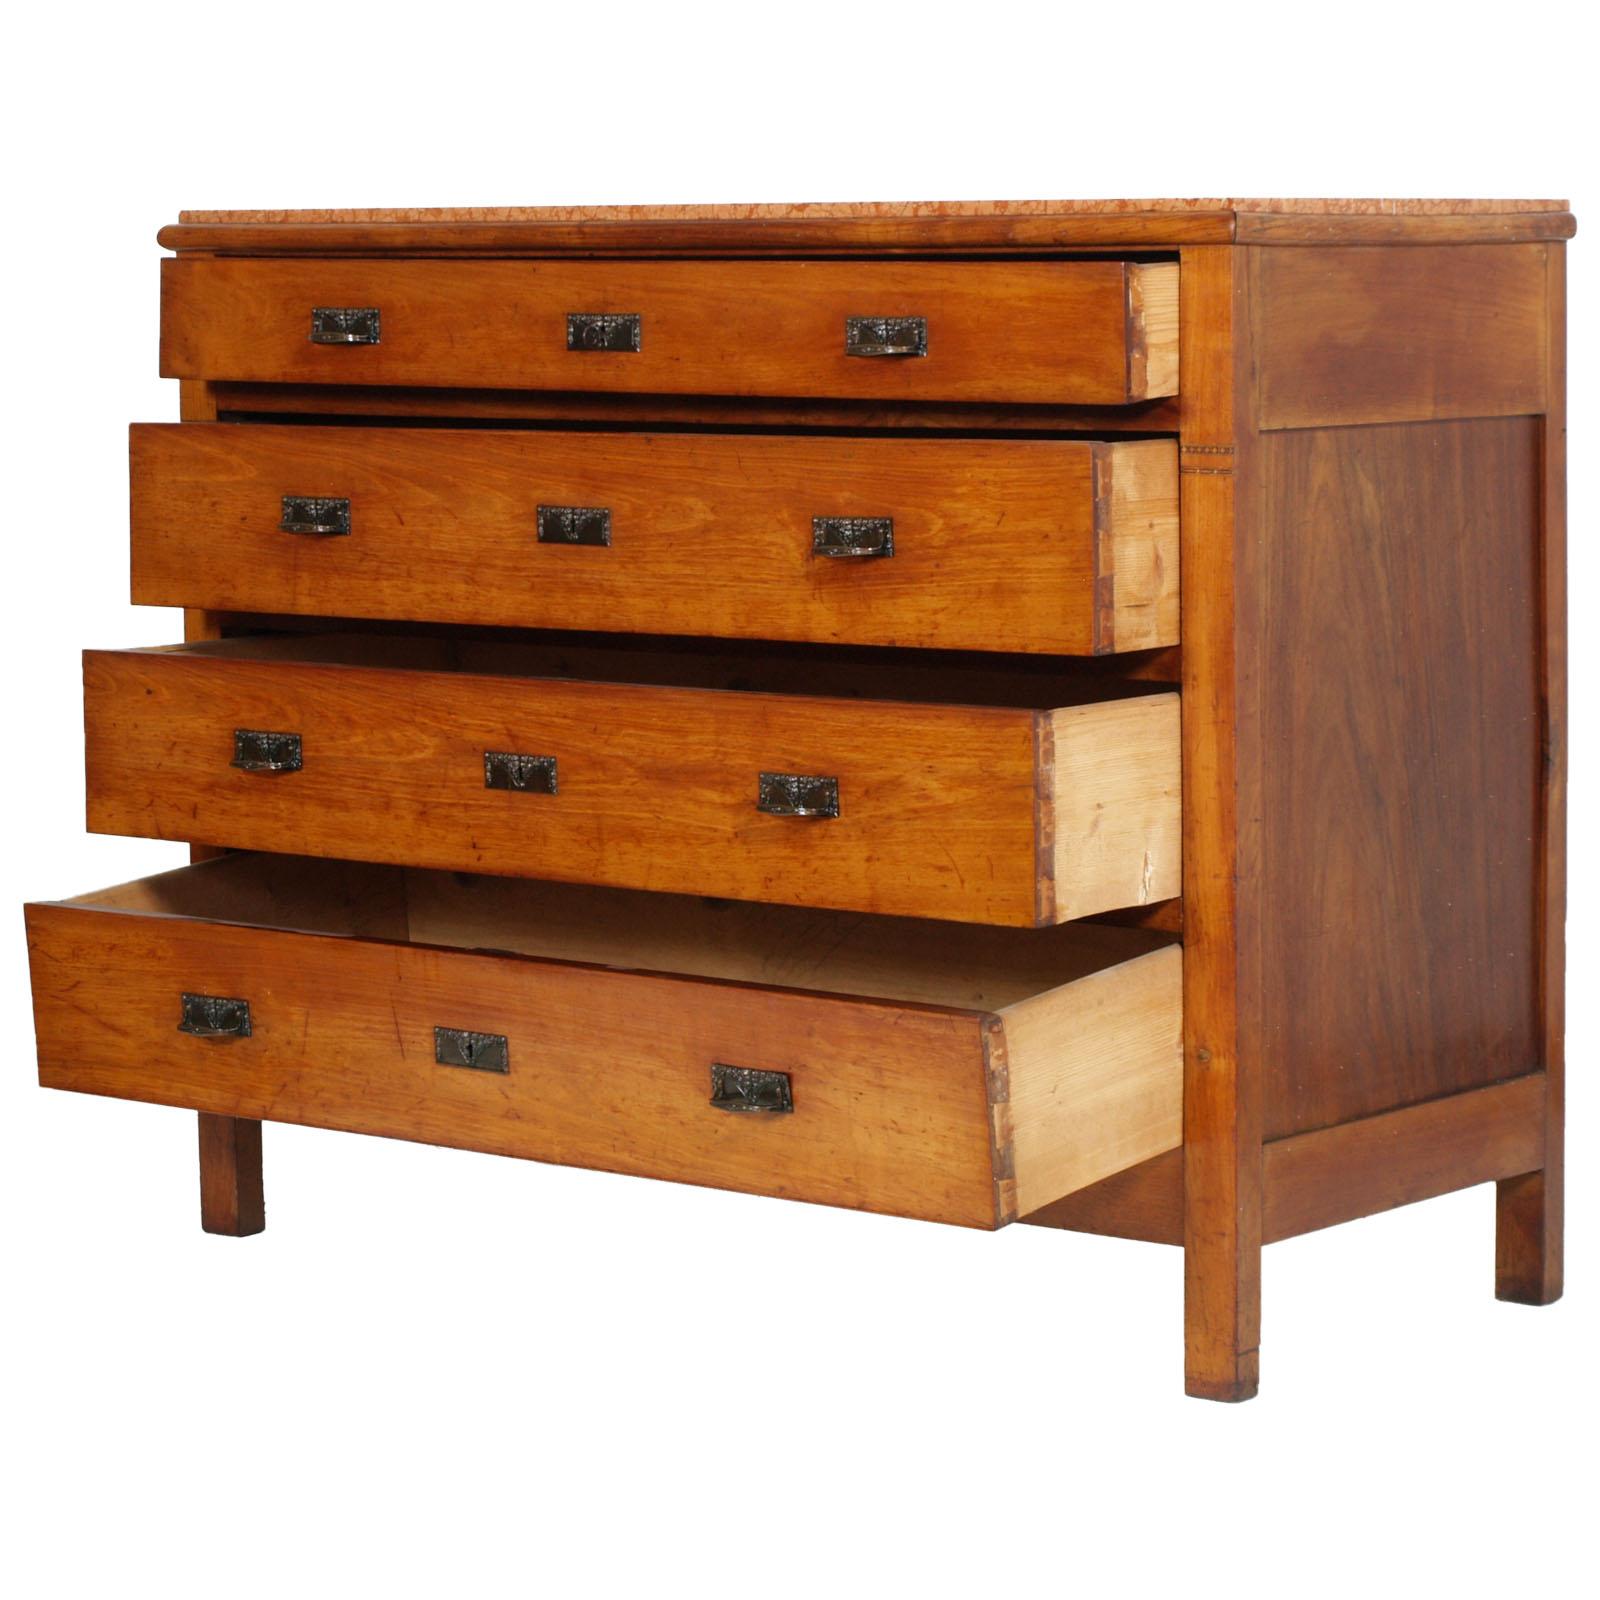 1910s Art Nouveau chest of drawers, dresser, in cheerywood with marble top 